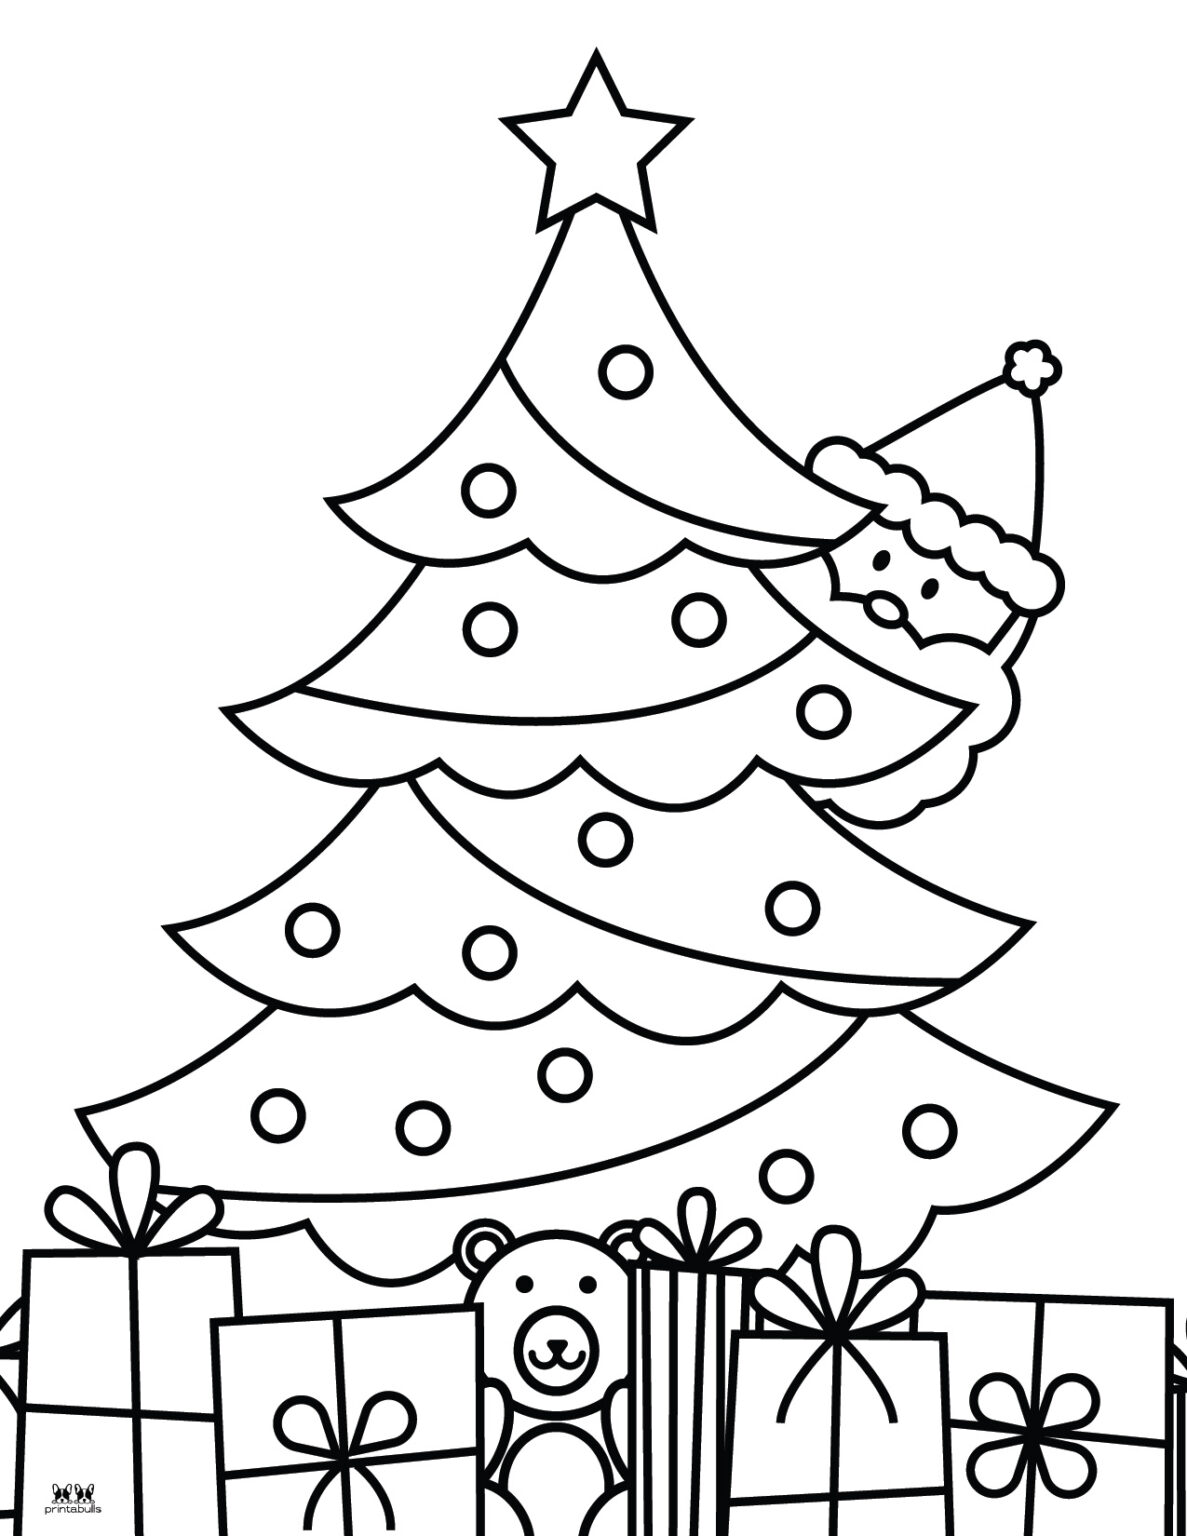 christmas-tree-coloring-pages-templates-22-free-printables